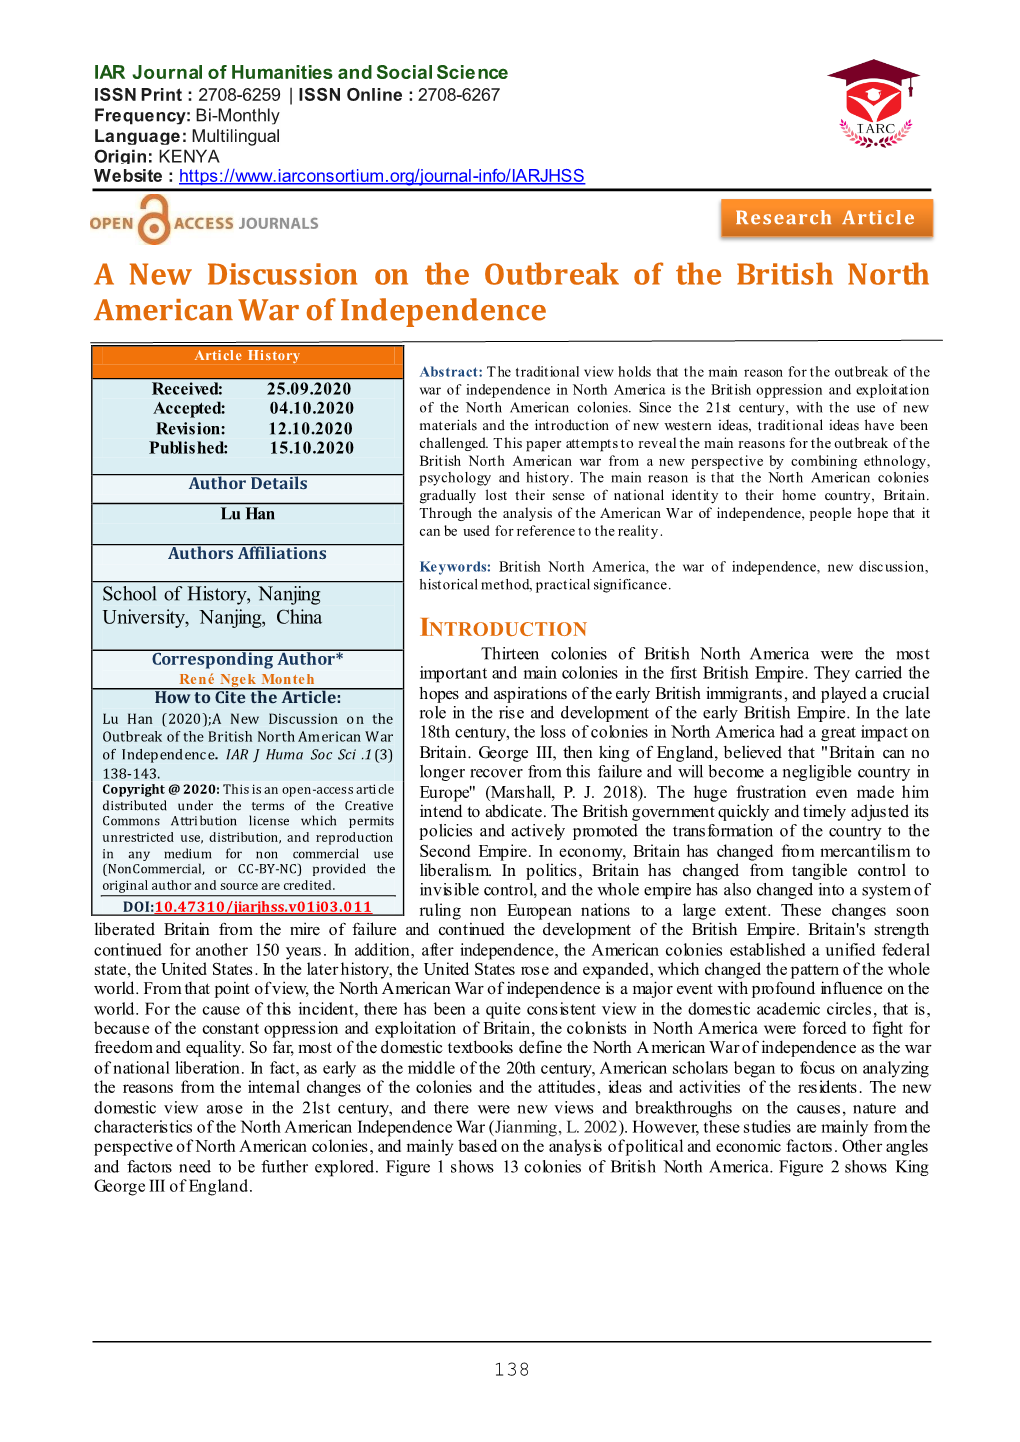 A New Discussion on the Outbreak of the British North American War of Independence